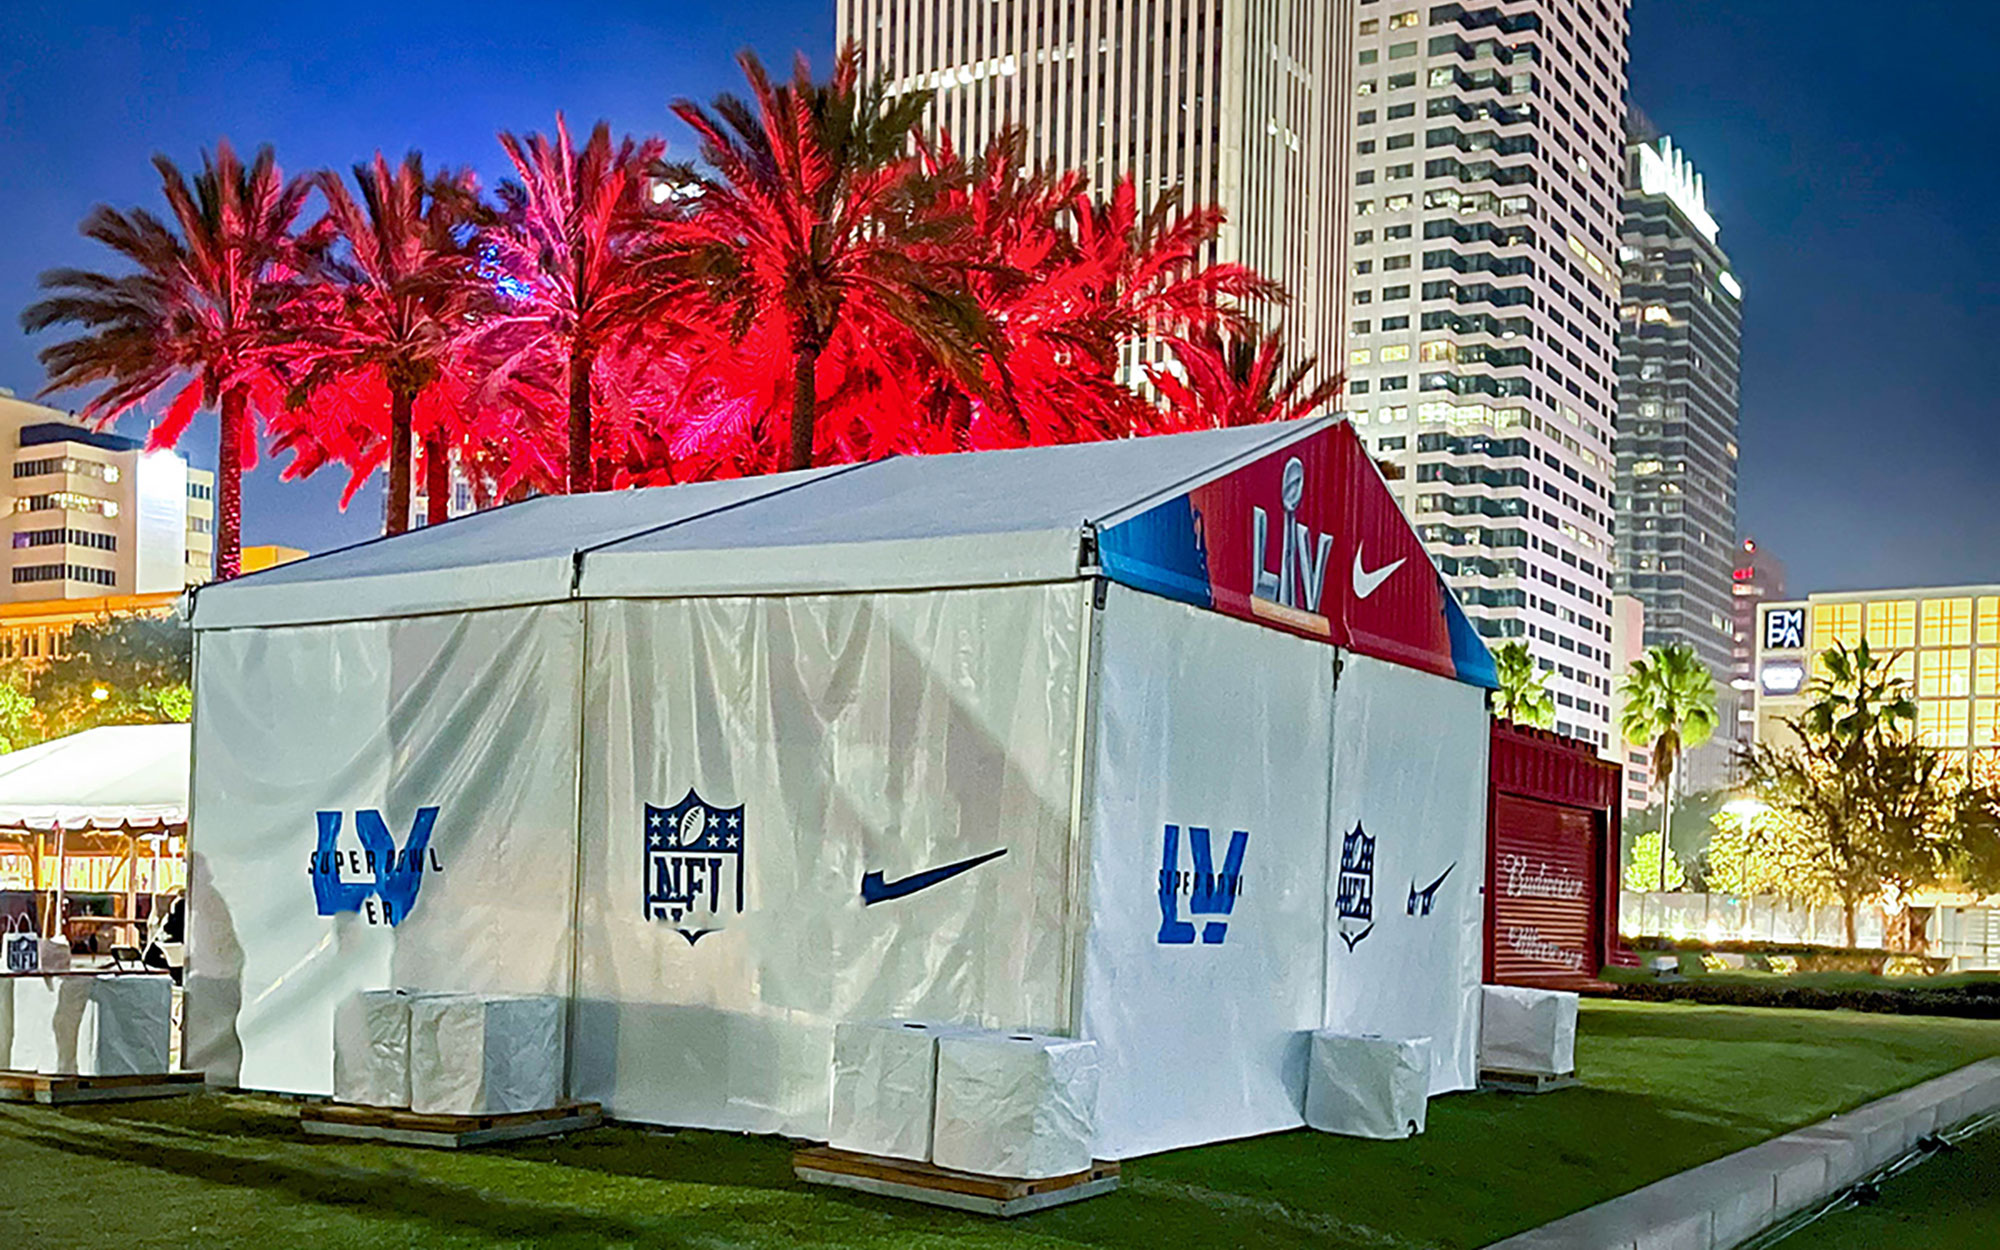 An in-process shot of Decal Doodle’s tent-graphic job at this year’s Super Bowl LV in Tampa, FL.